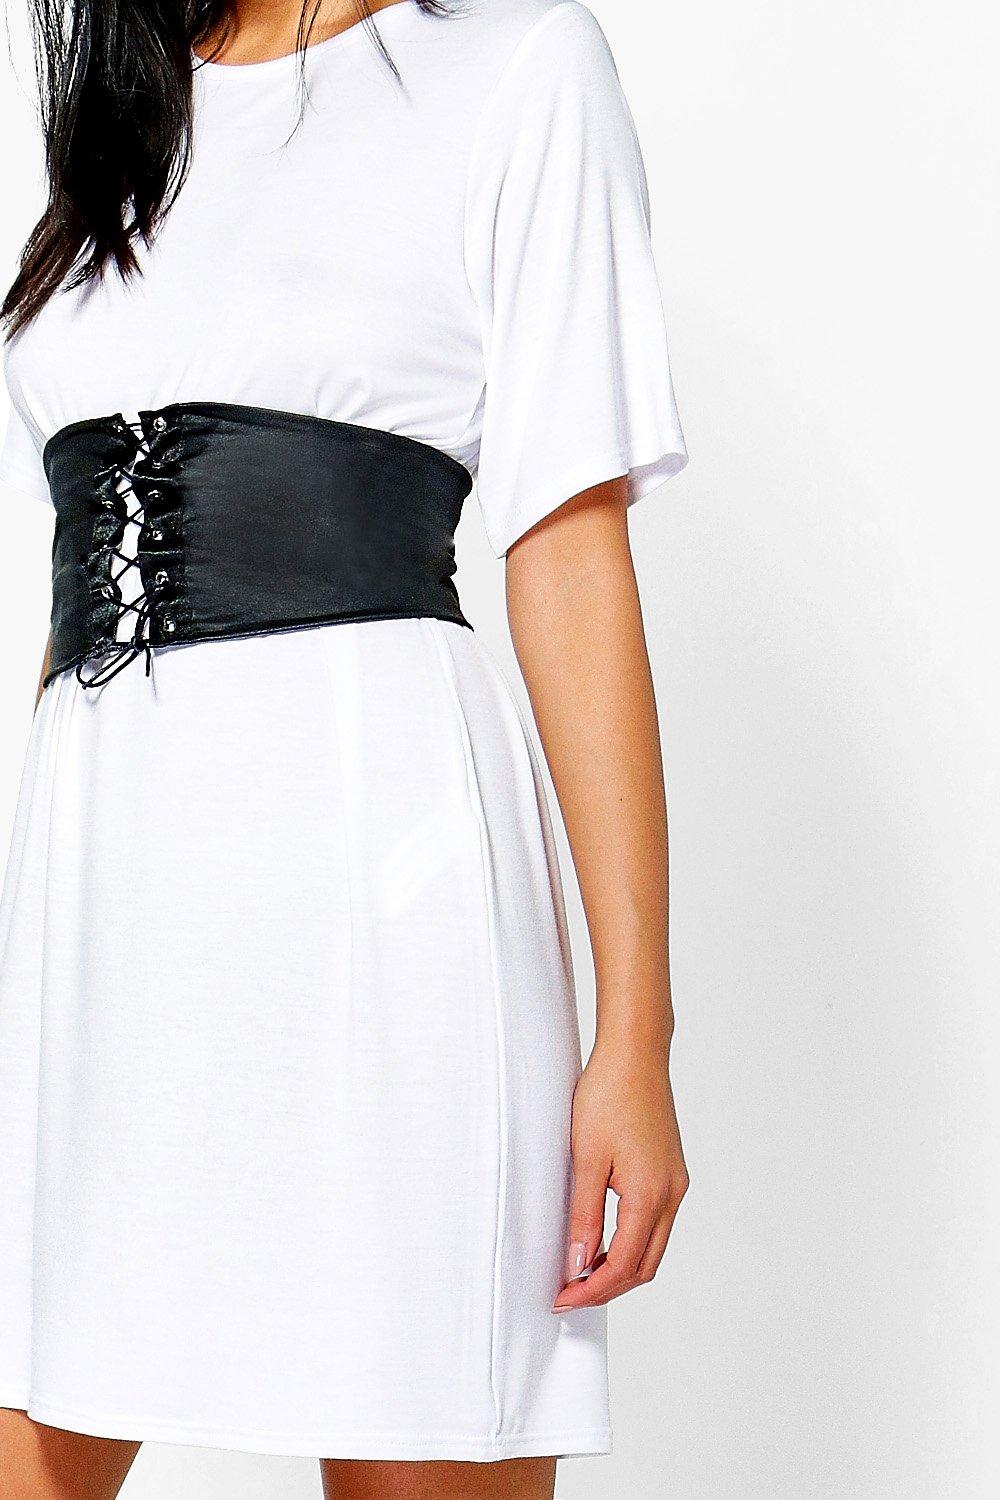 Featured image of post White T Shirt Dress With Corset Belt : A corset belt is an accessory that is used to keep your dress in proper shape, beautifying your appearance.